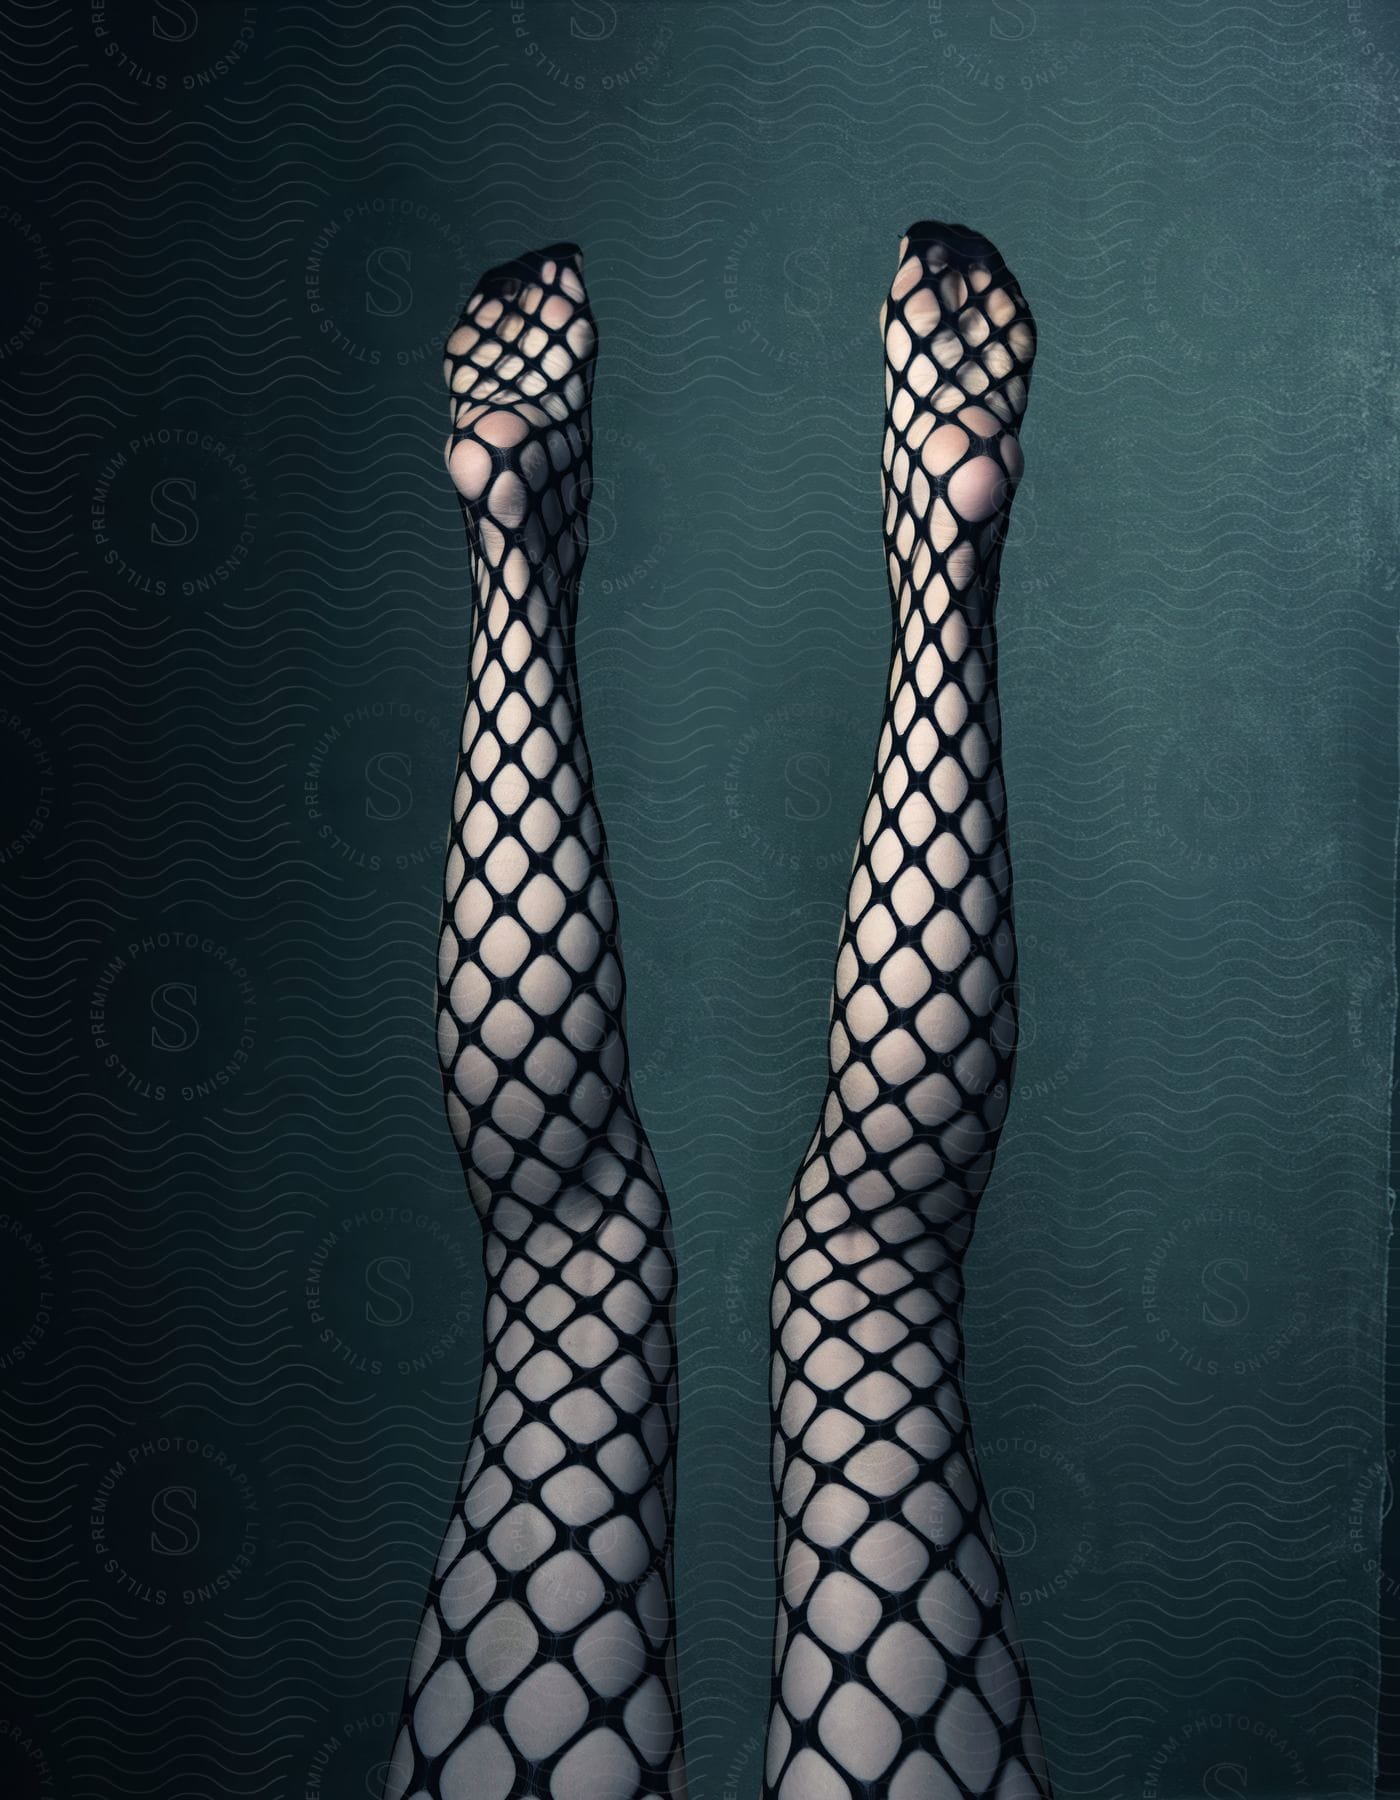 A womans legs with net stockings are in the air in front of a plain grey background